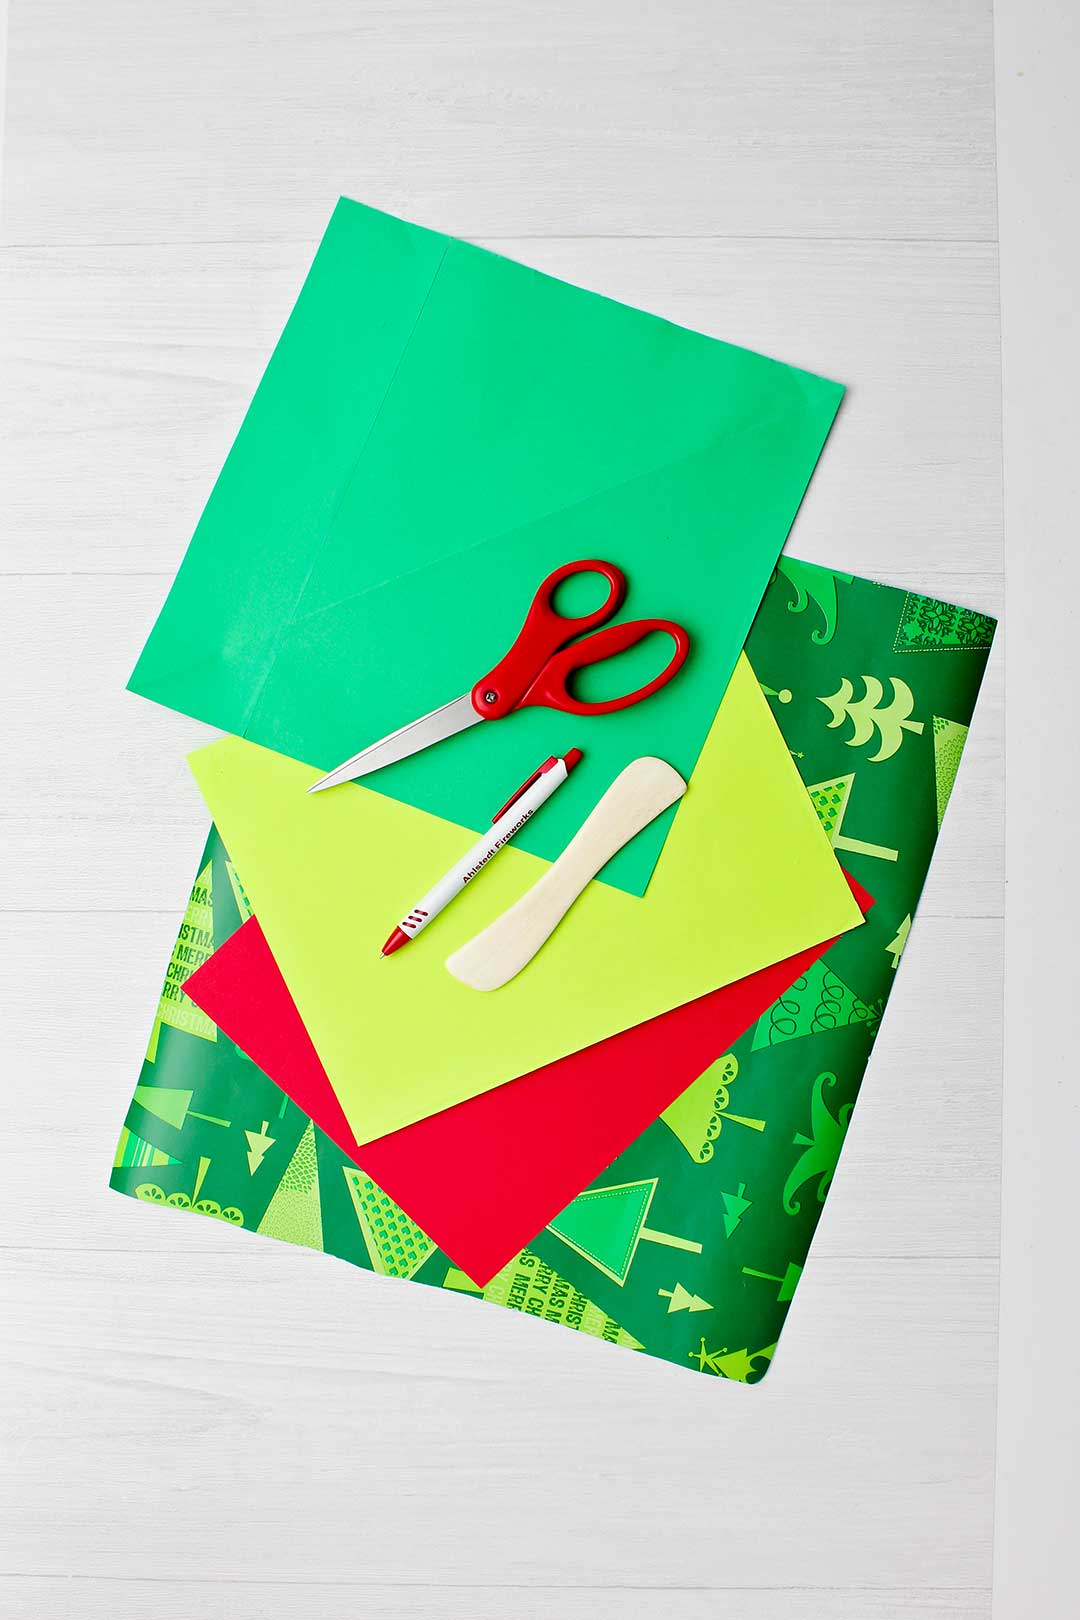 Red and green and patterned papers with scissors, pen and paper creaser laying on top.